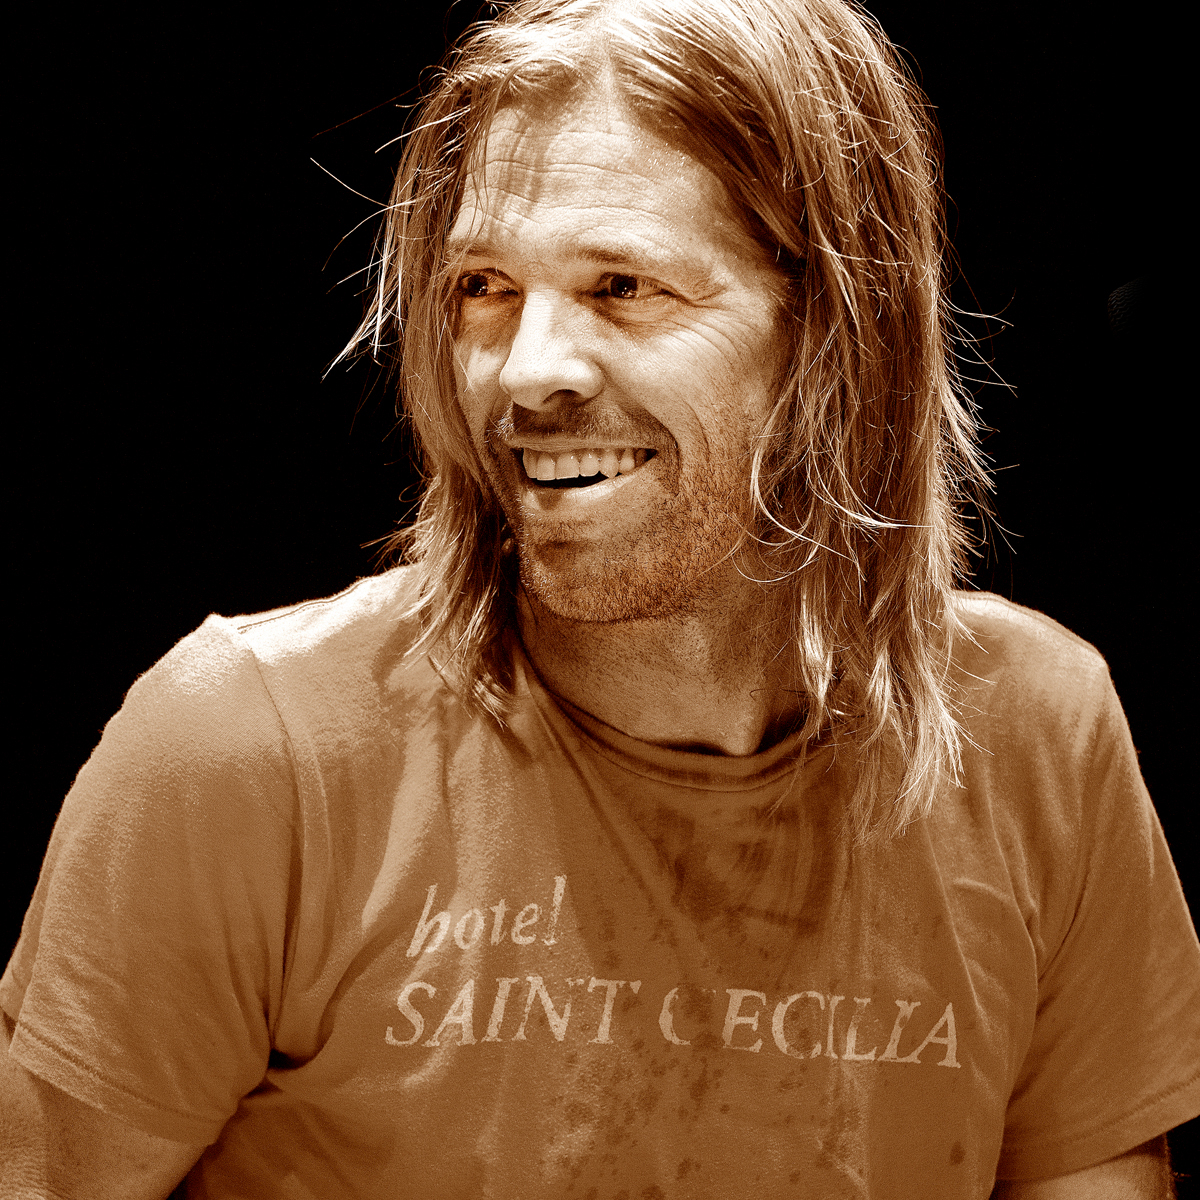 Foo Fighters Honor Taylor Hawkins on the Late Drummer’s Birthday